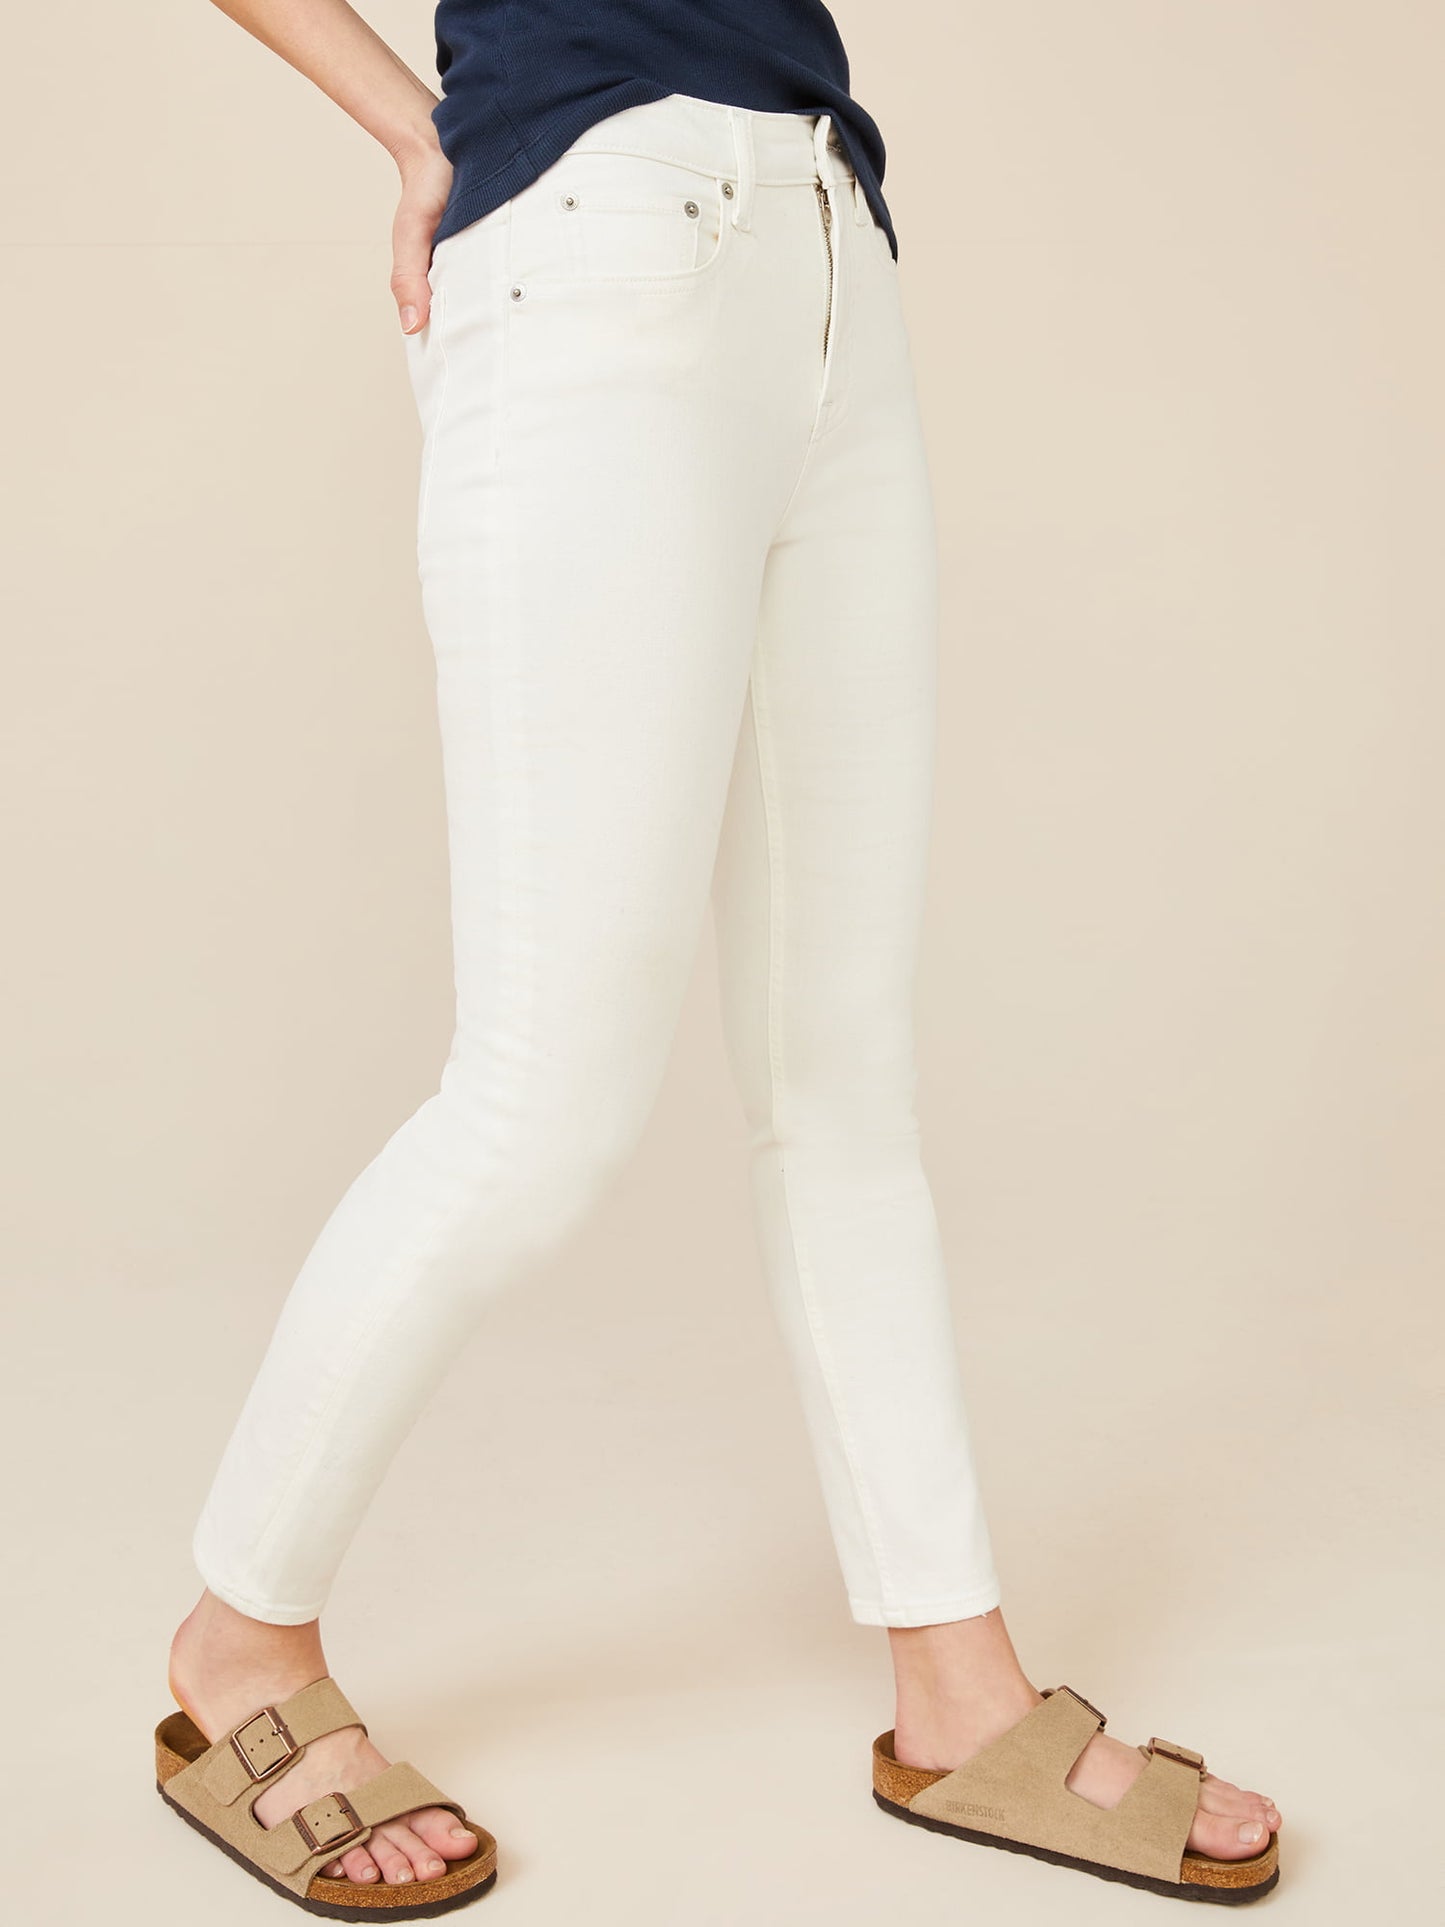 Free Assembly Womens High Rise Skinny Jeans